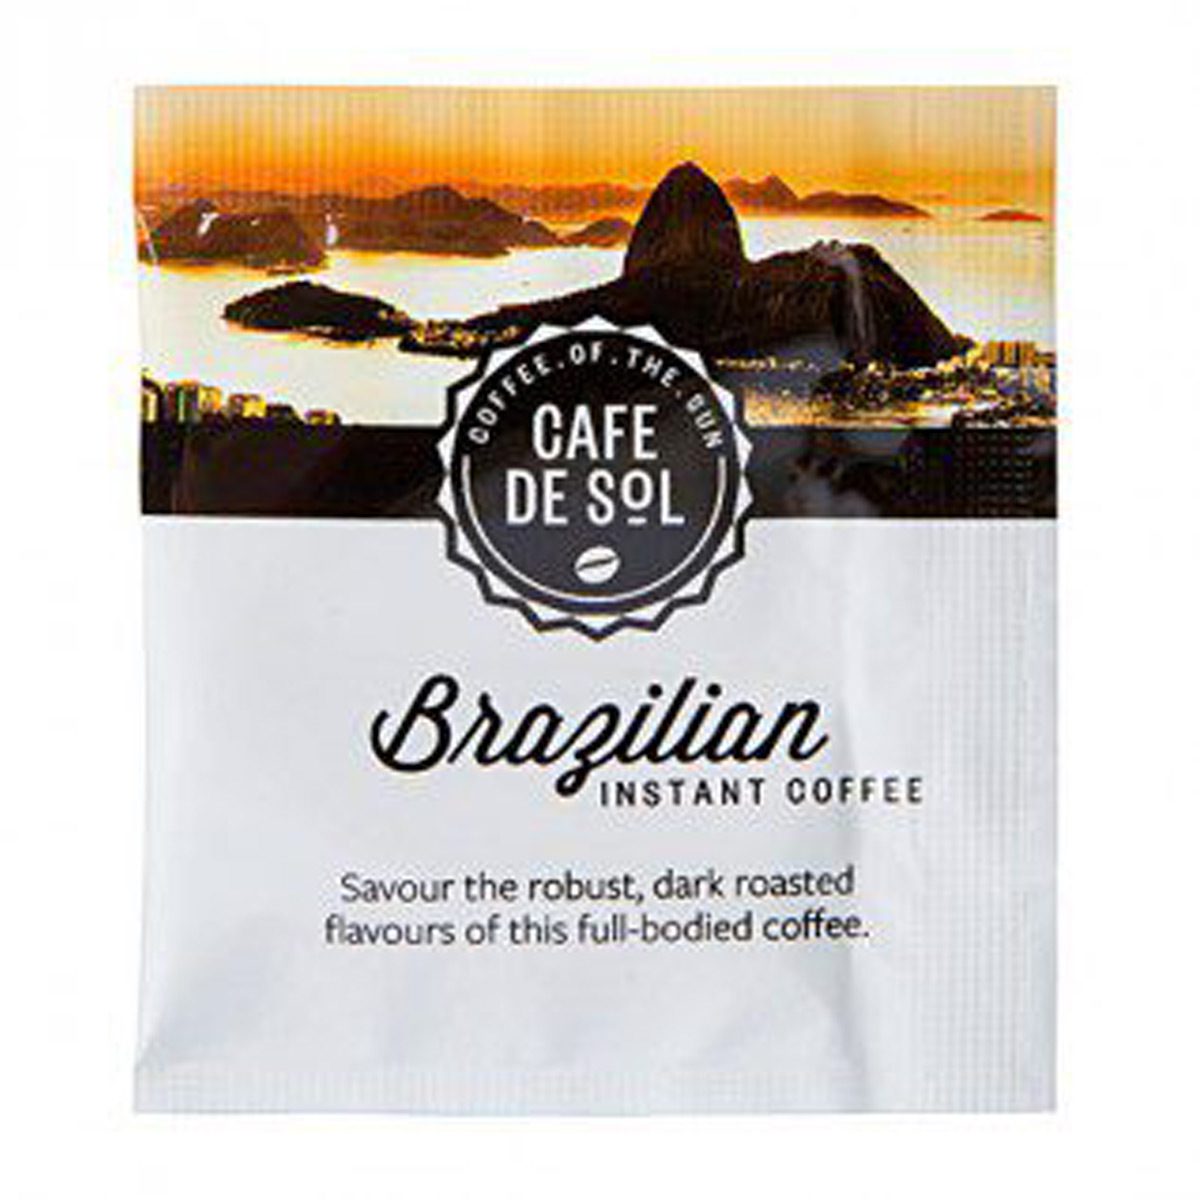 consumables-hospitality-beverage-food-Cafe-de-sol-brazilian-coffee-sachet-x500-rich-dark-roasted-flavour-freeze-dried-coffee-vjs-distributors-HPCB